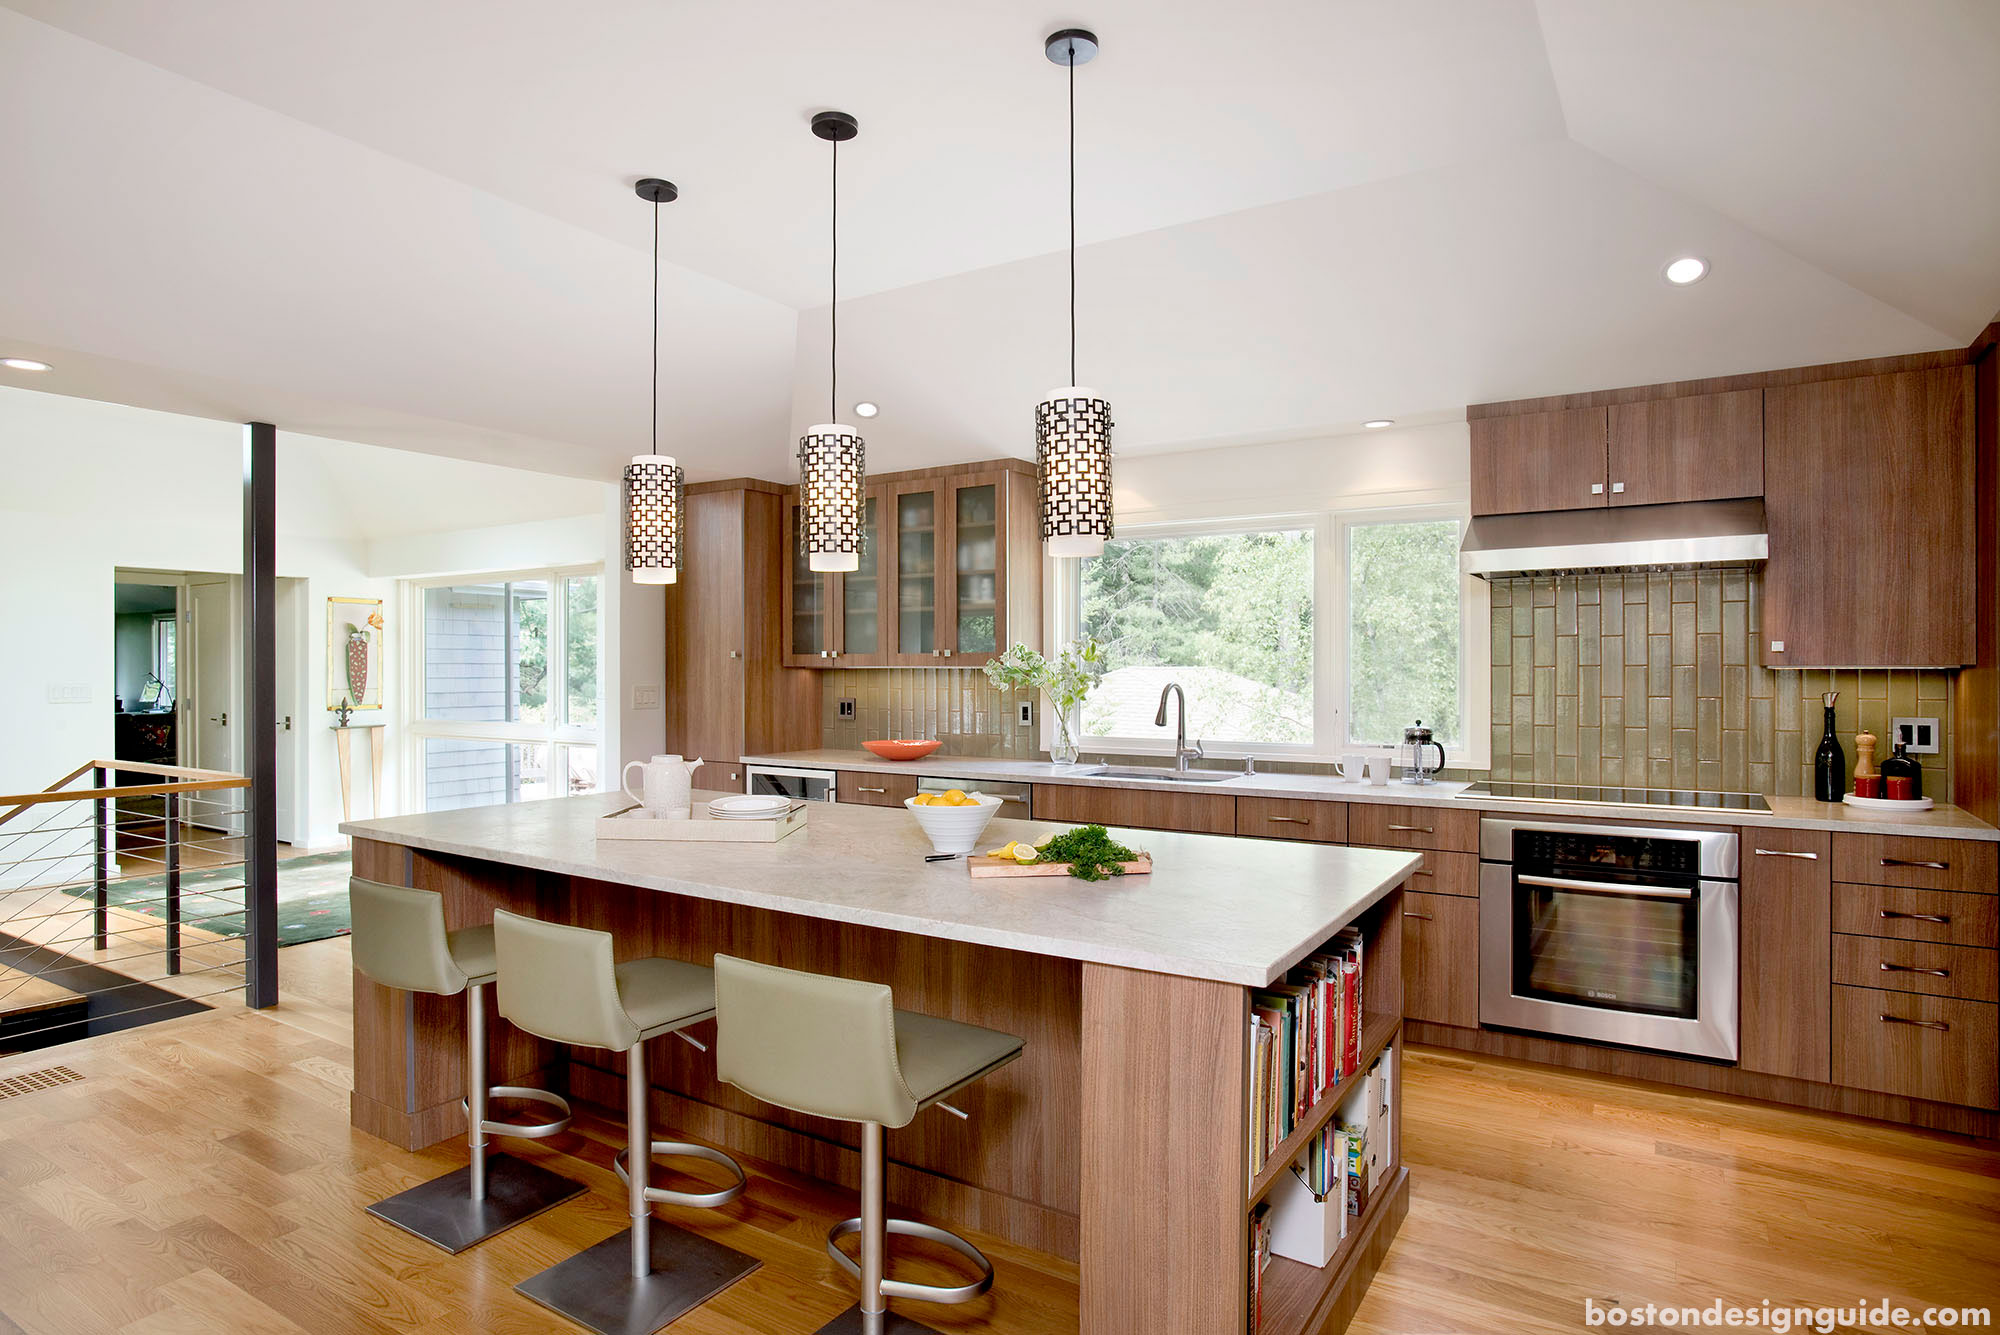 Lynch Construction & Remodeling | Boston Design Guide